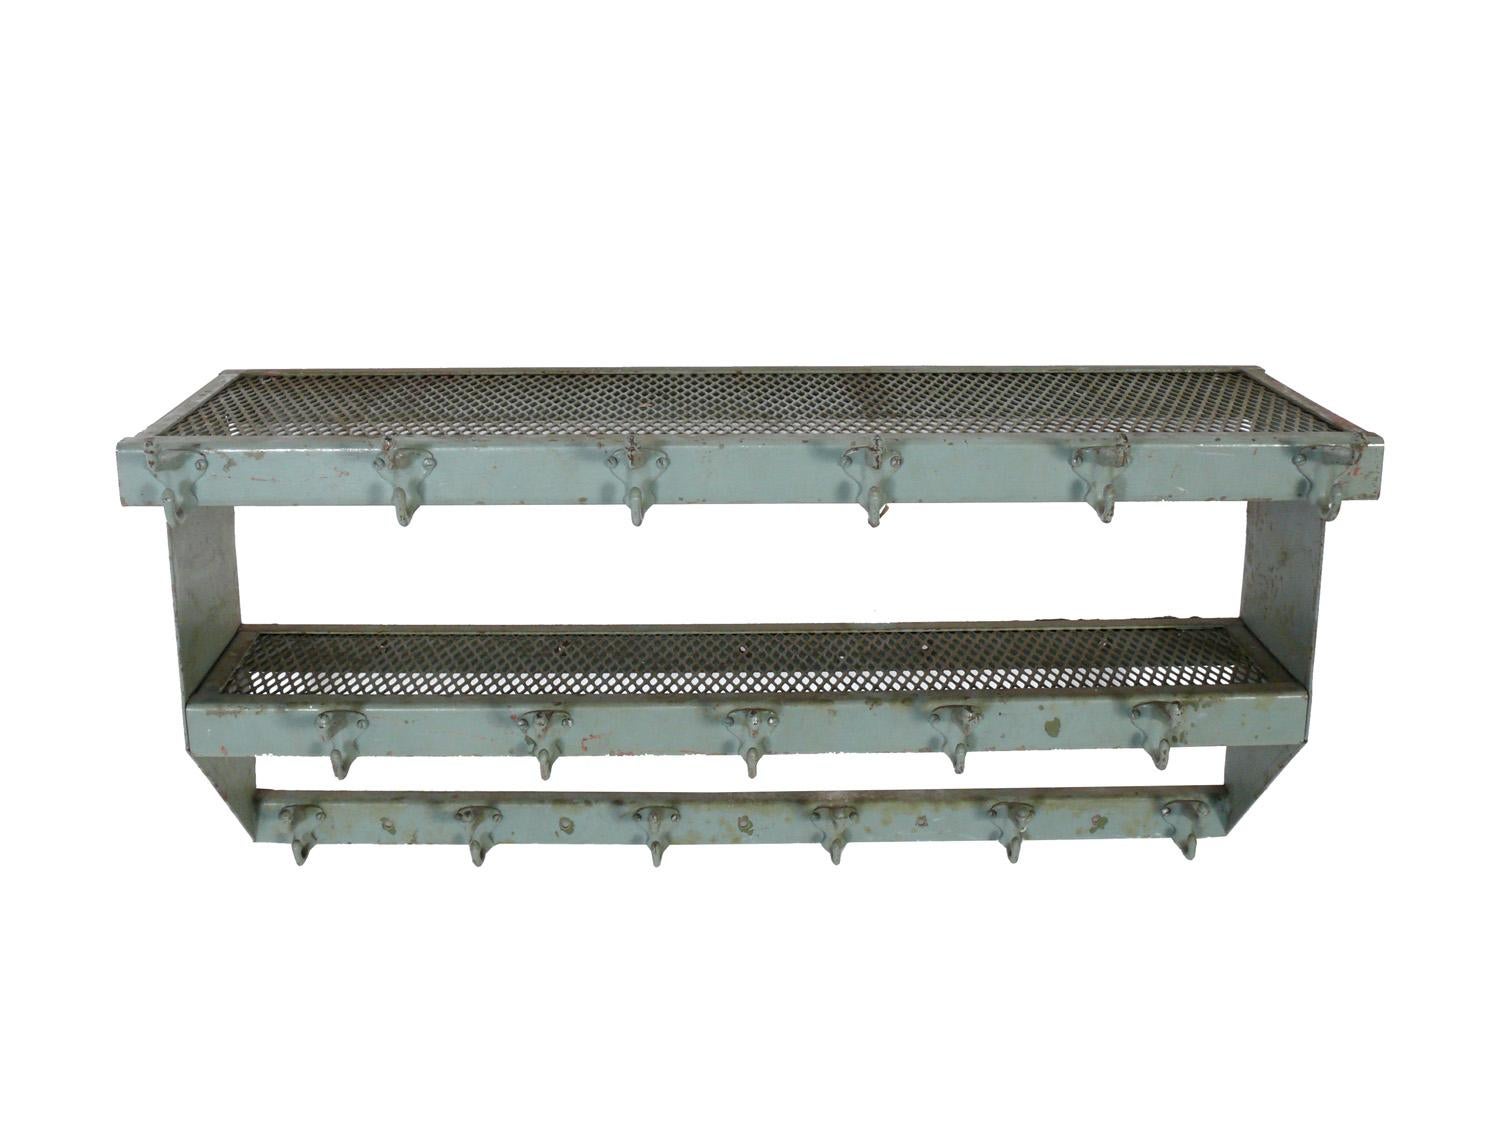 Industrial metal shelves with coat hangers, American, circa 1950s. They retain their original patina, covered in multiple layers of paint and graffiti from over the years. They are a versatile size and can be used in an entry or mud room to hang